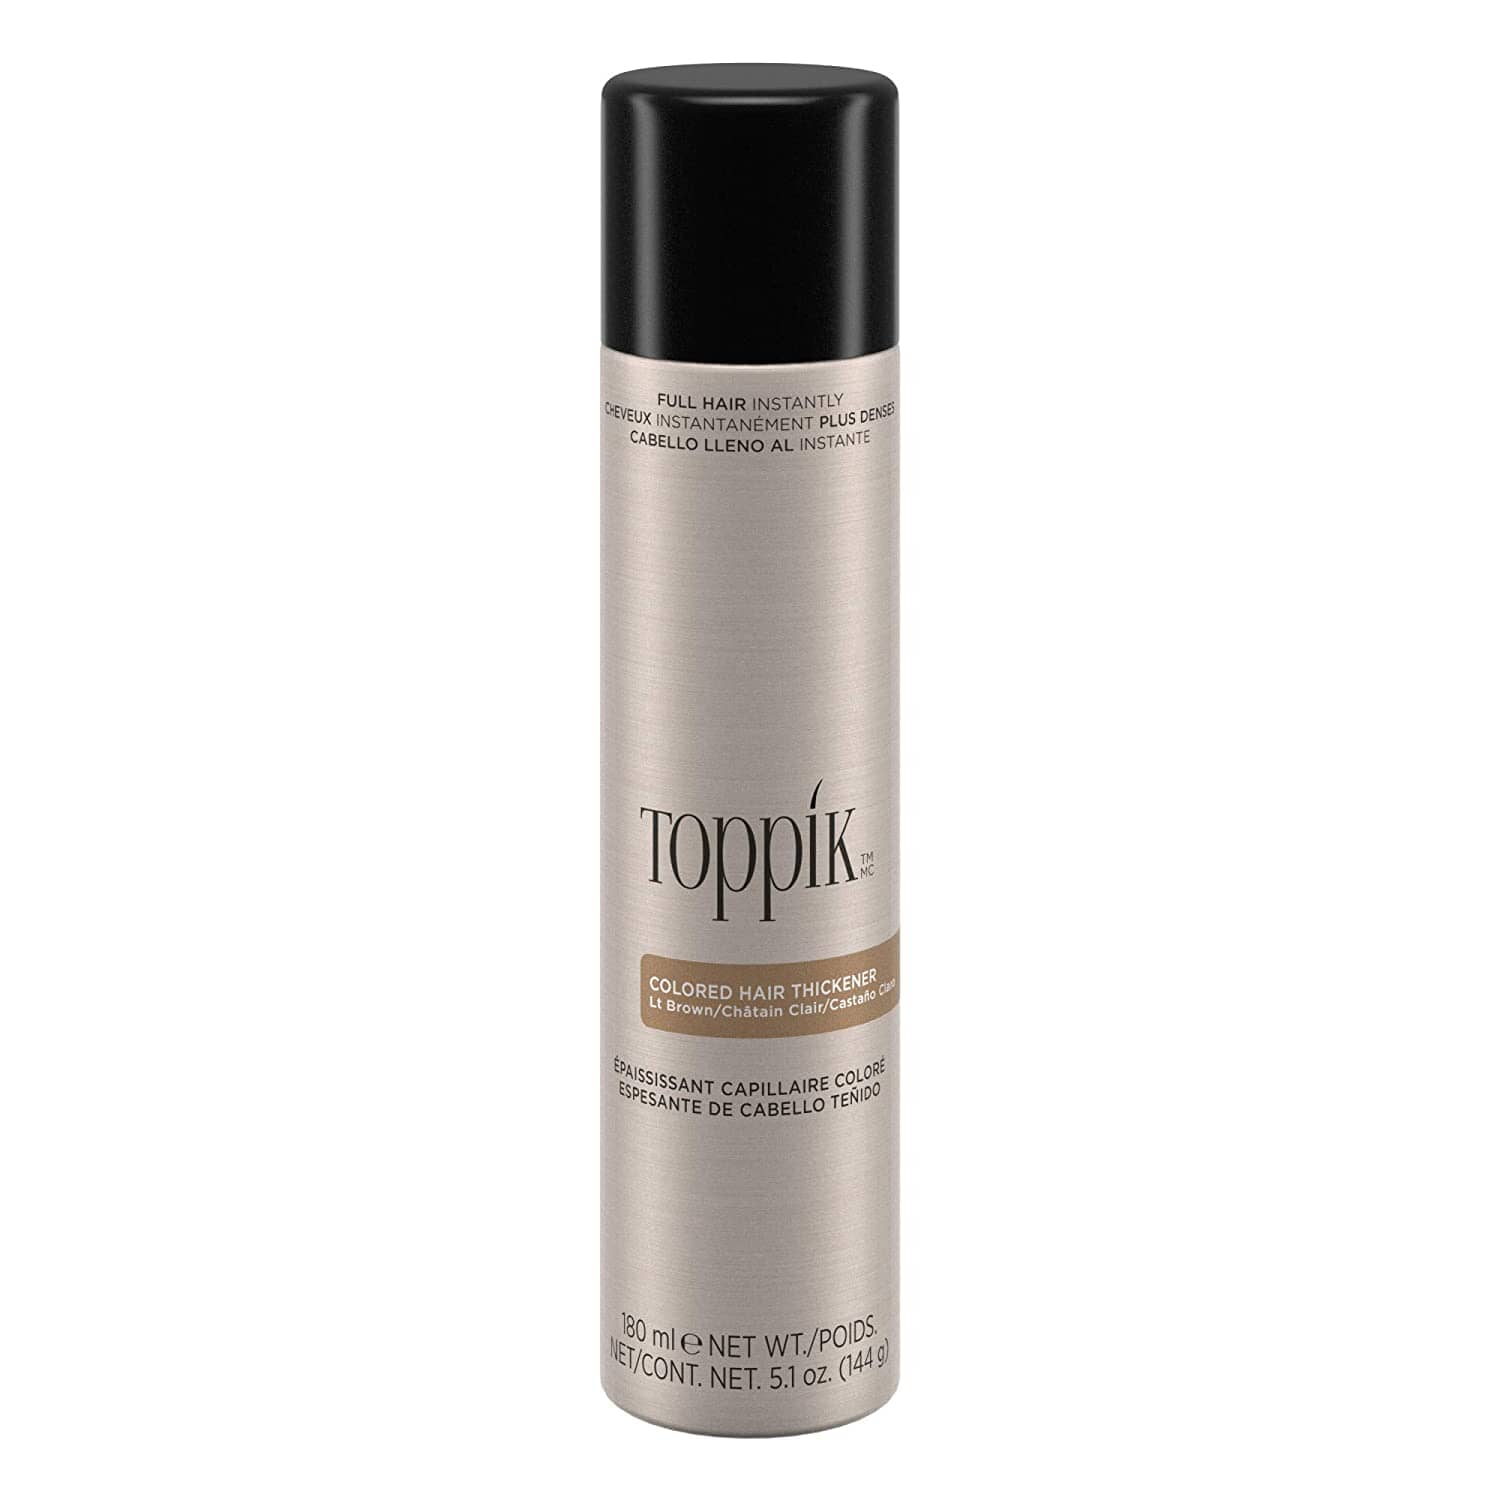 Toppik Colored Hair Thickener - LIGHT BROWN Toppik 5.1 oz/144g bottle Shop at Exclusive Beauty Club